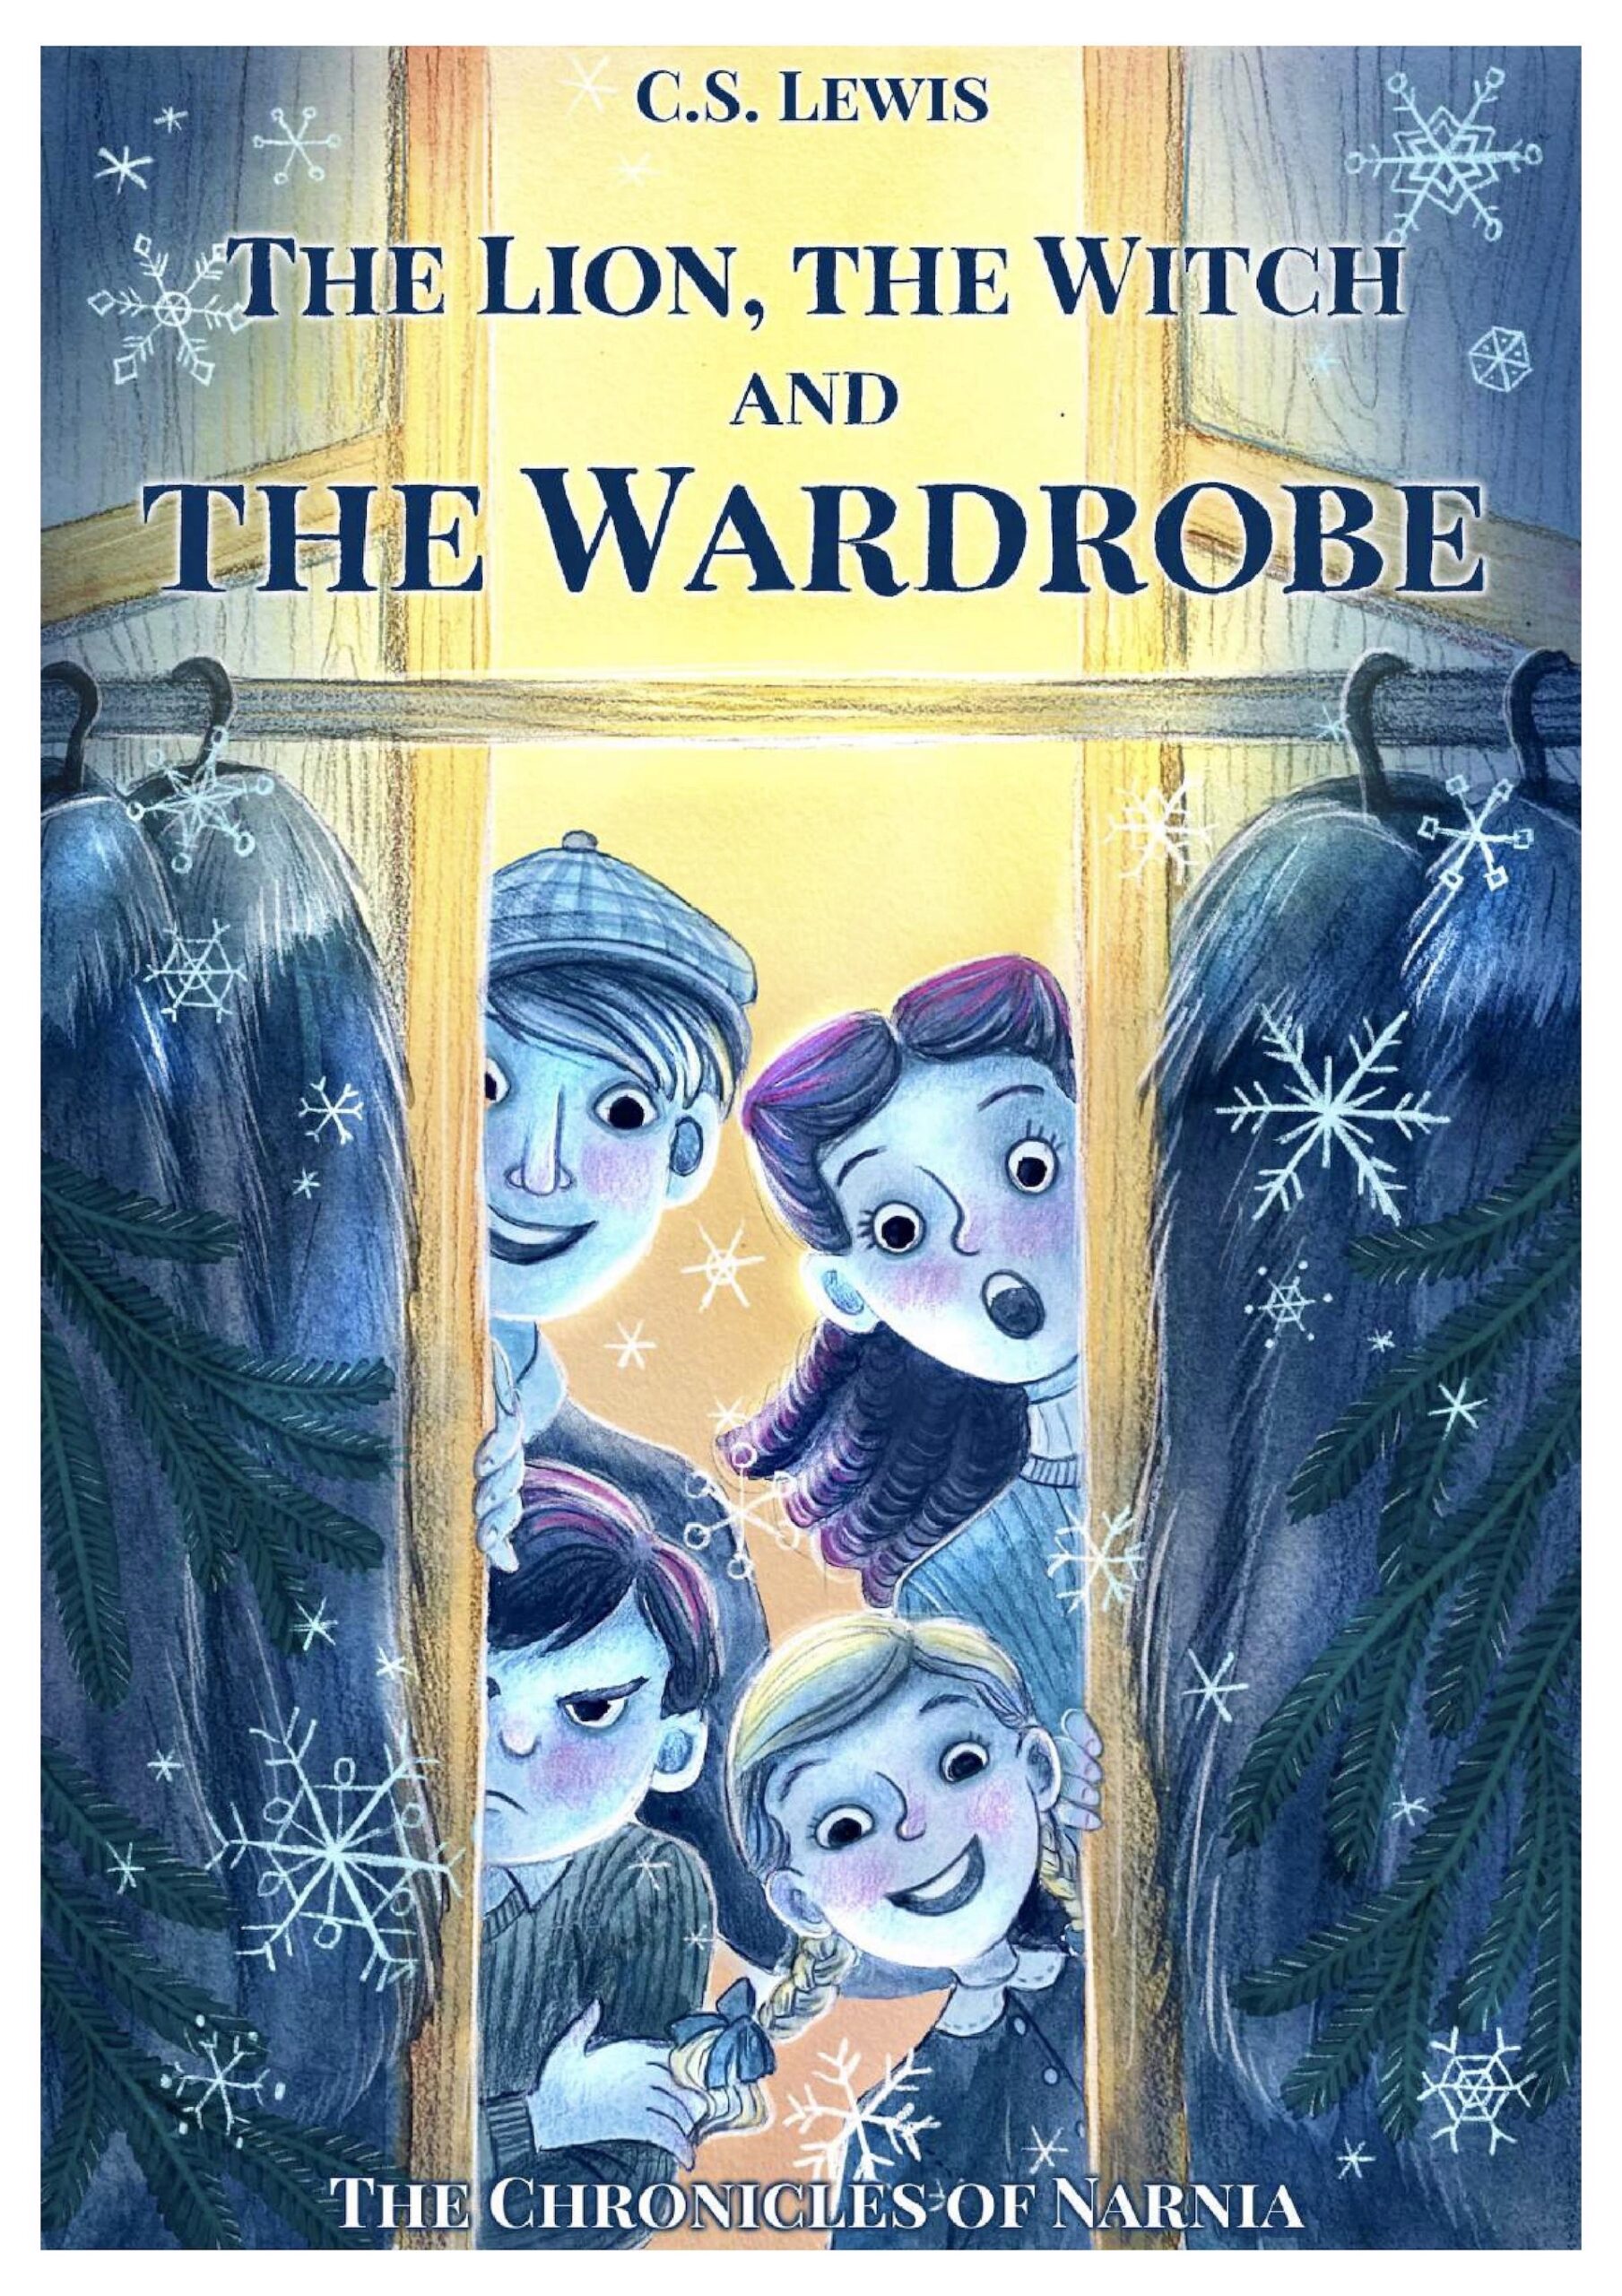 Book cover art for The Lion the Witch and the Wardrobe. The view is from inside the wardrobe looking out through the opening wardrobe doors, fur coats, and the branches of fur trees. Peter, Susan, Edmond, and Lucy are peaking in through the doors. Snowflakes fall in the foreground.